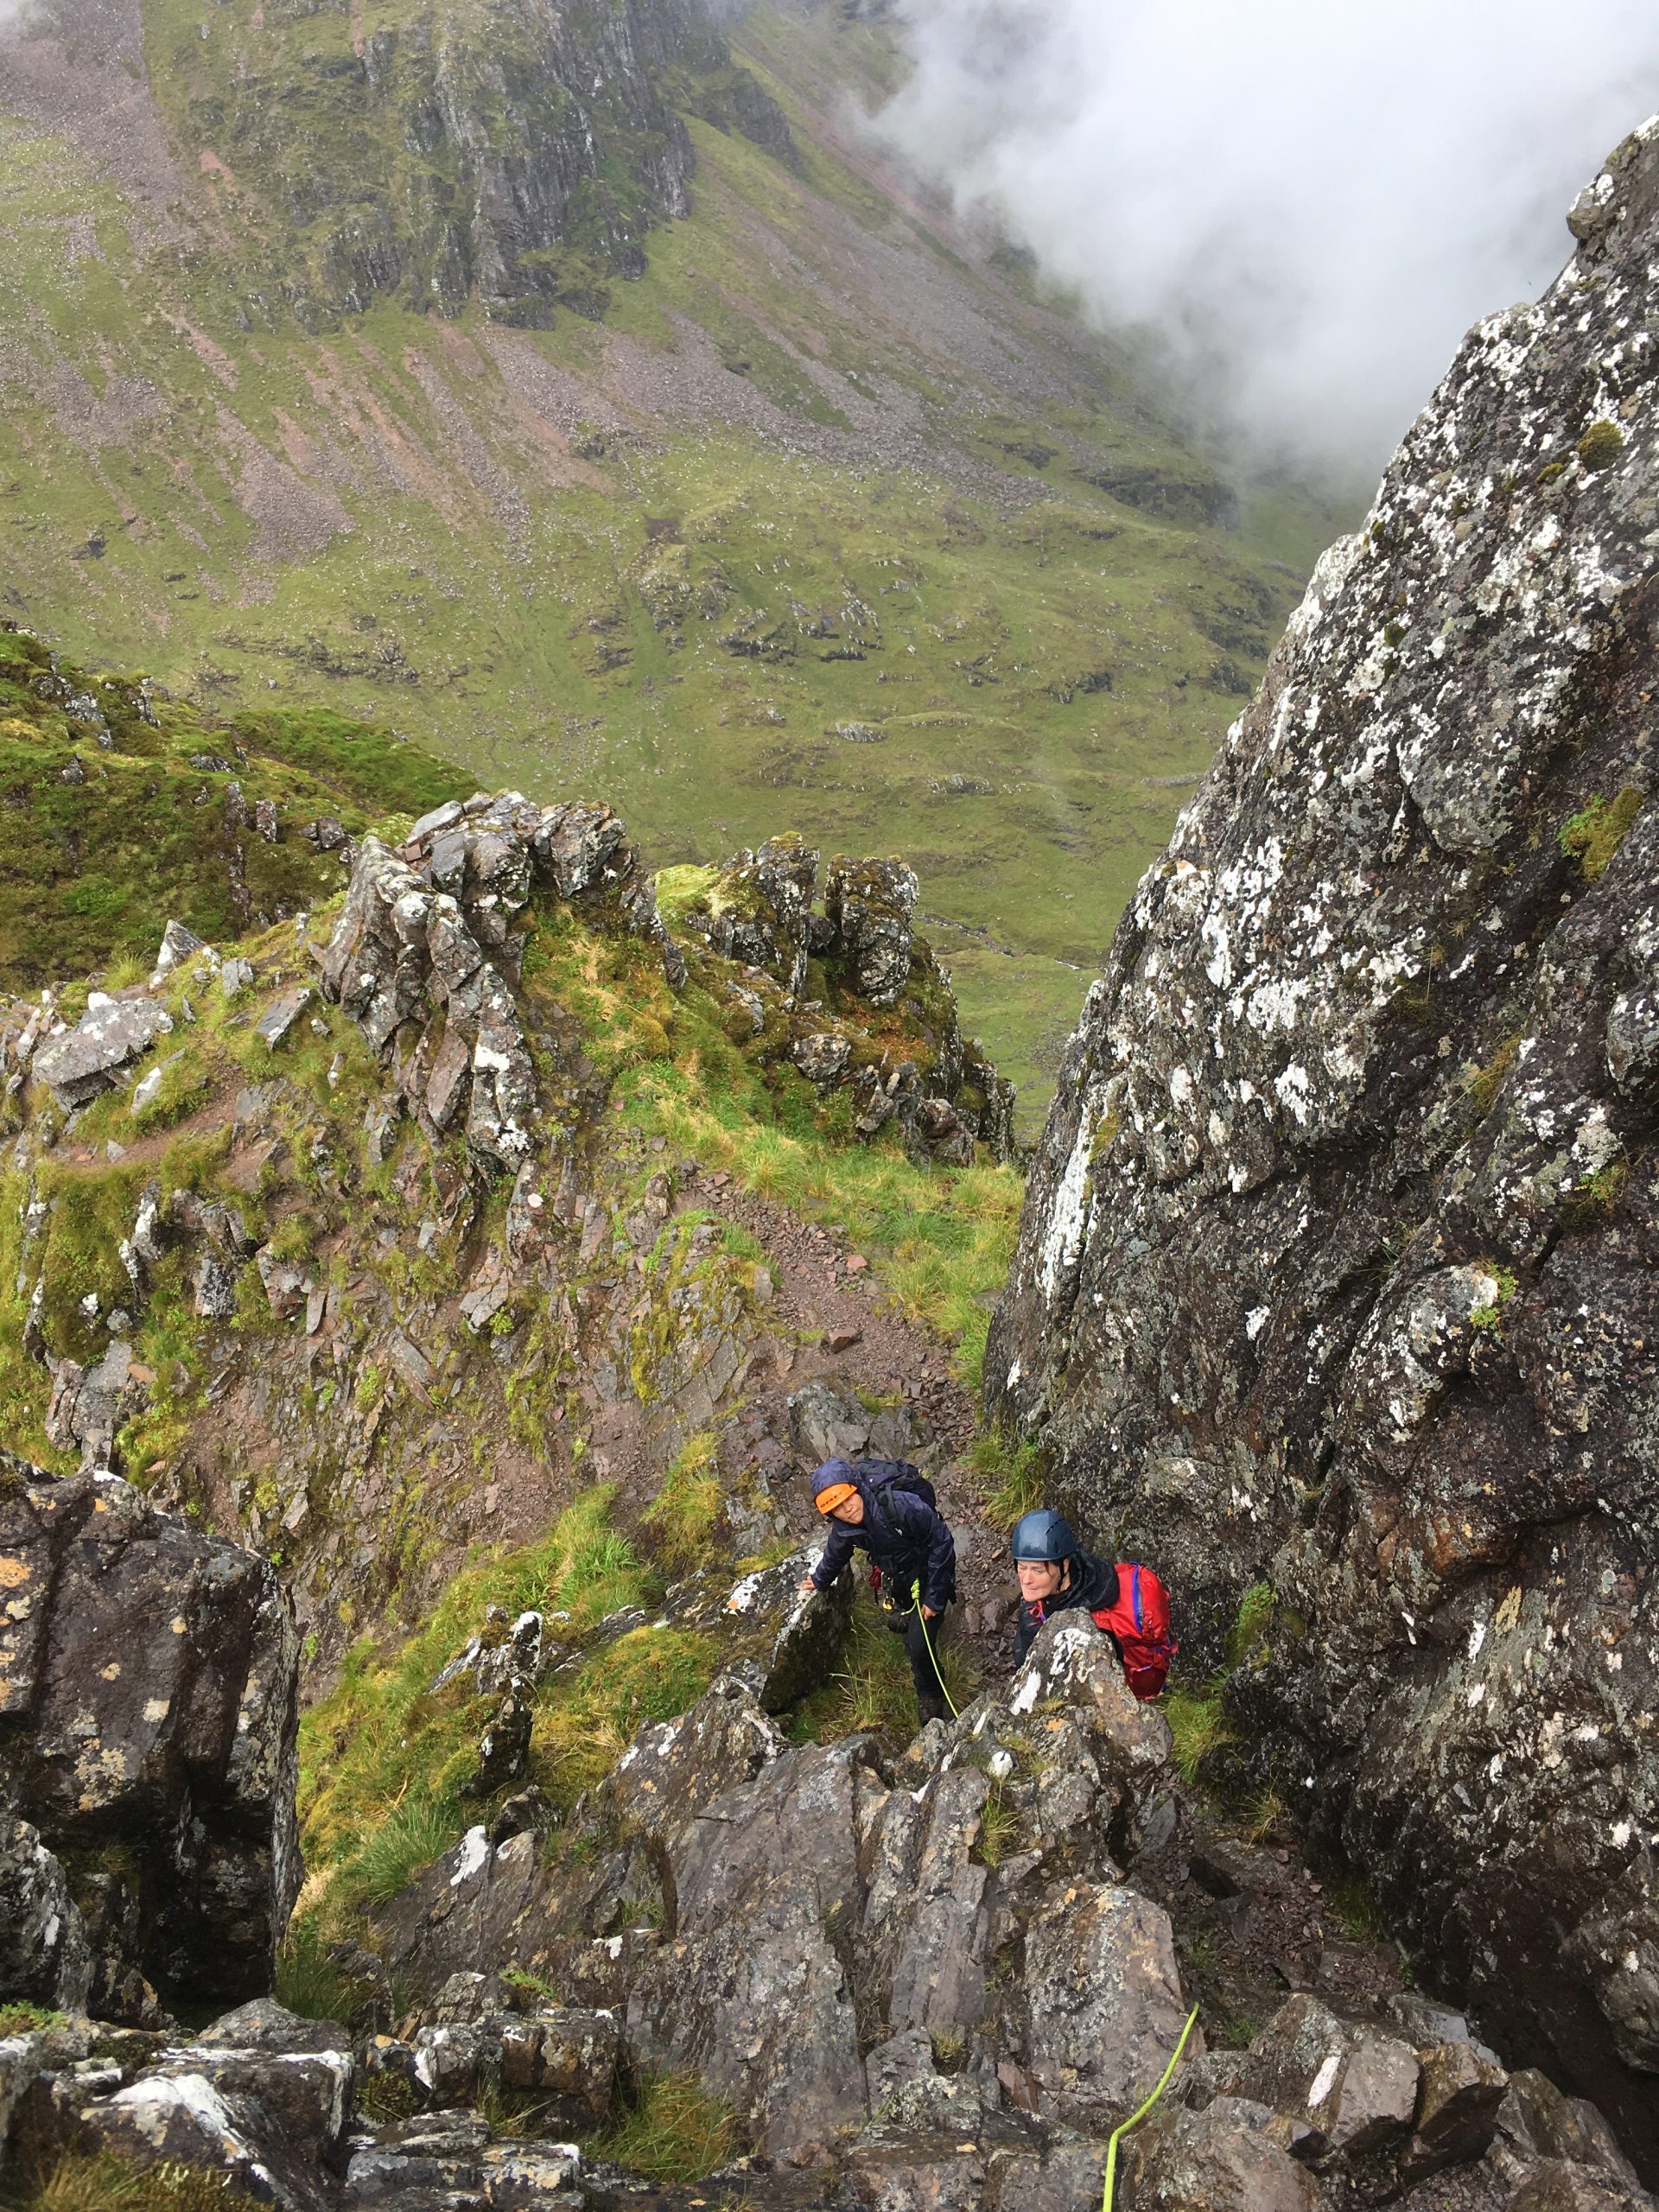 Two climbers wait their turn to move at one of the steeper sections while scrambling the Aonach Eagach Ridge in Glencoe